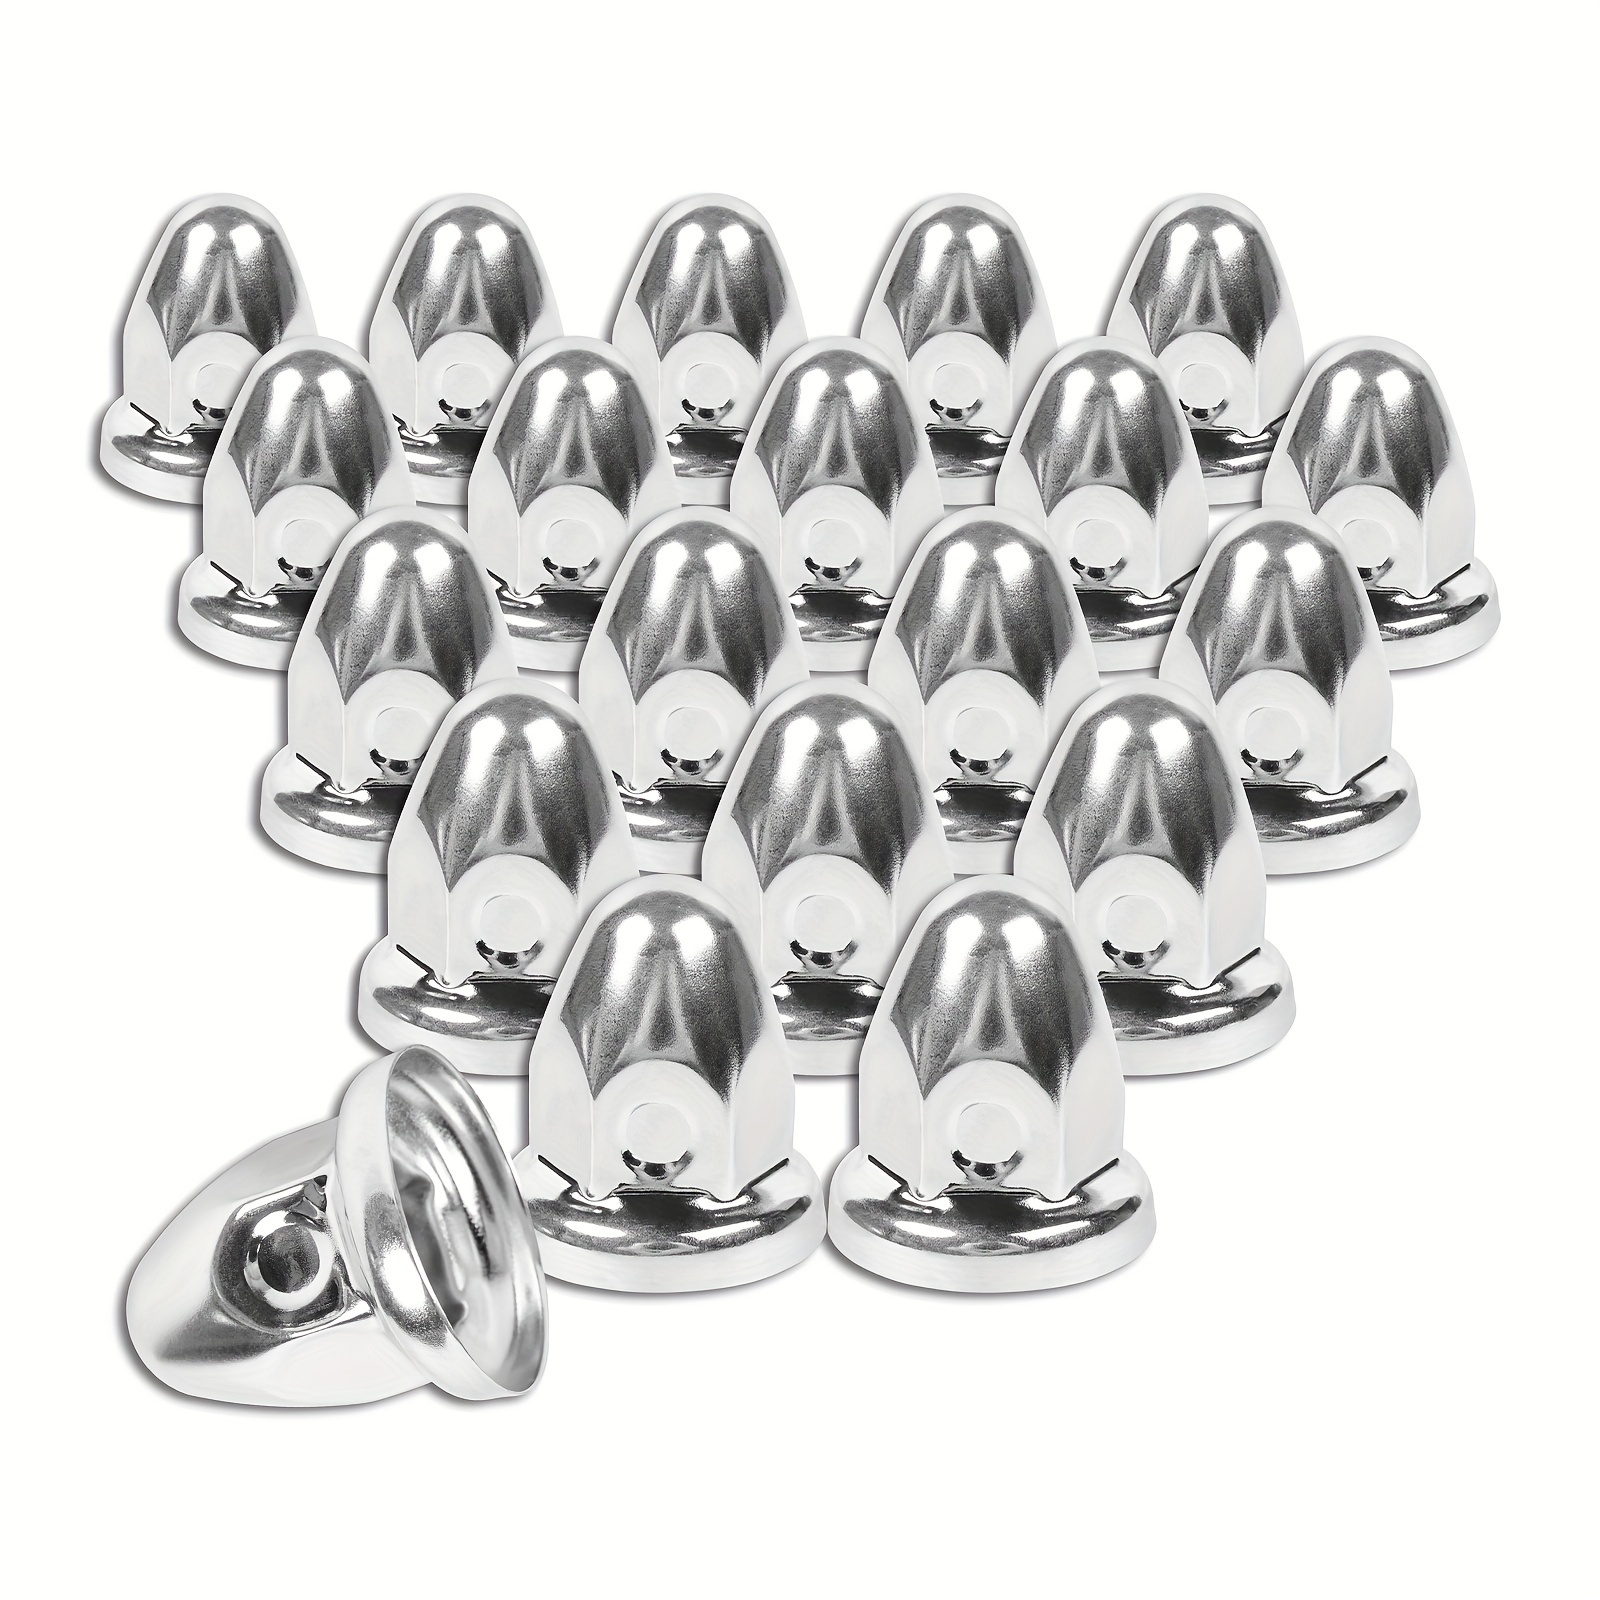 

33mm X 2 1/2" Steel Lug Nuts Covers, Polished Bullet Flanged Caps Pointed Push-on Lug Nut Cover For Semi Trucks